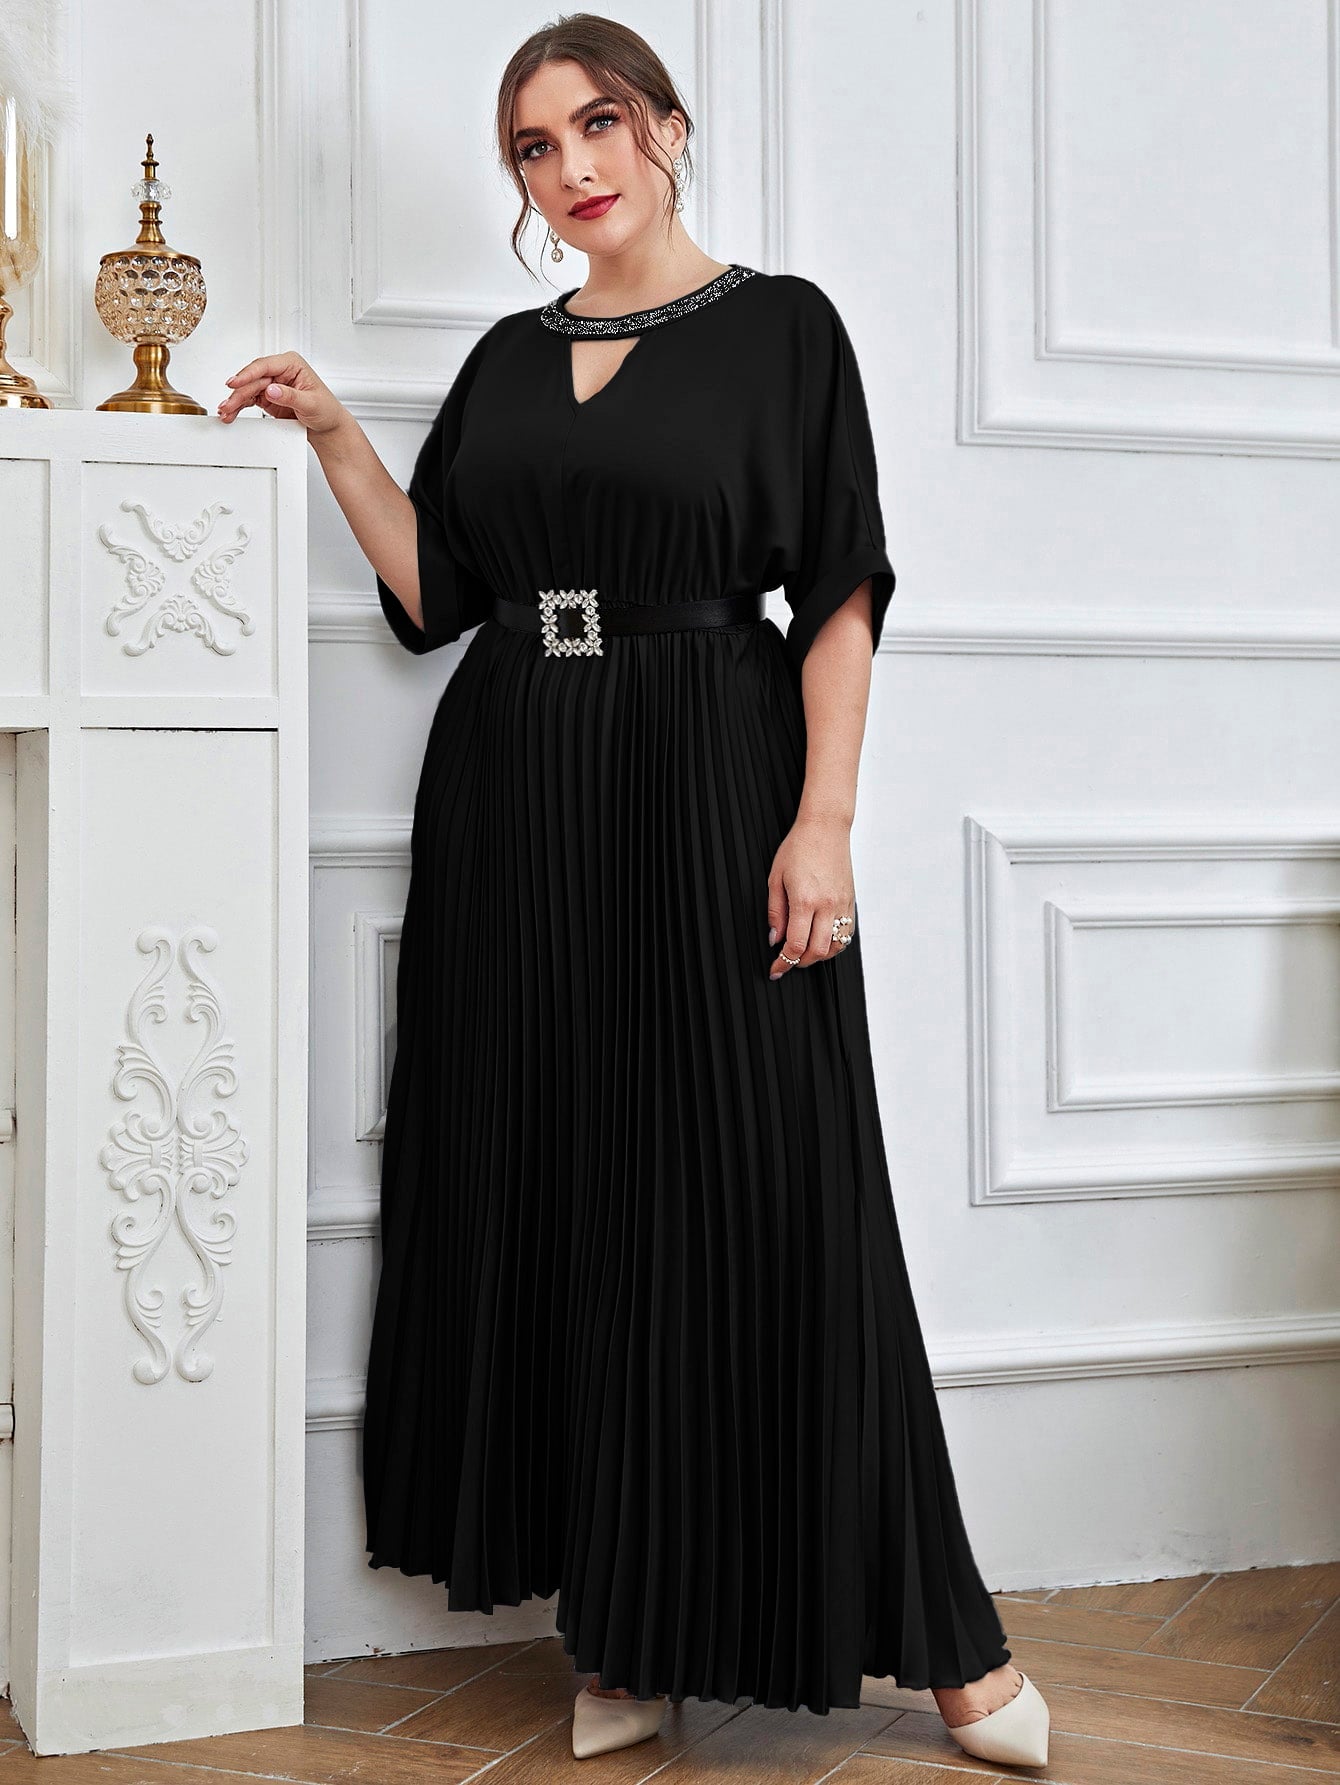 Chic And Elegant Women Plus Size Dress Haft Long Sleeves With Belt Maxi Draped Noble Clothing For Evening Party Festival